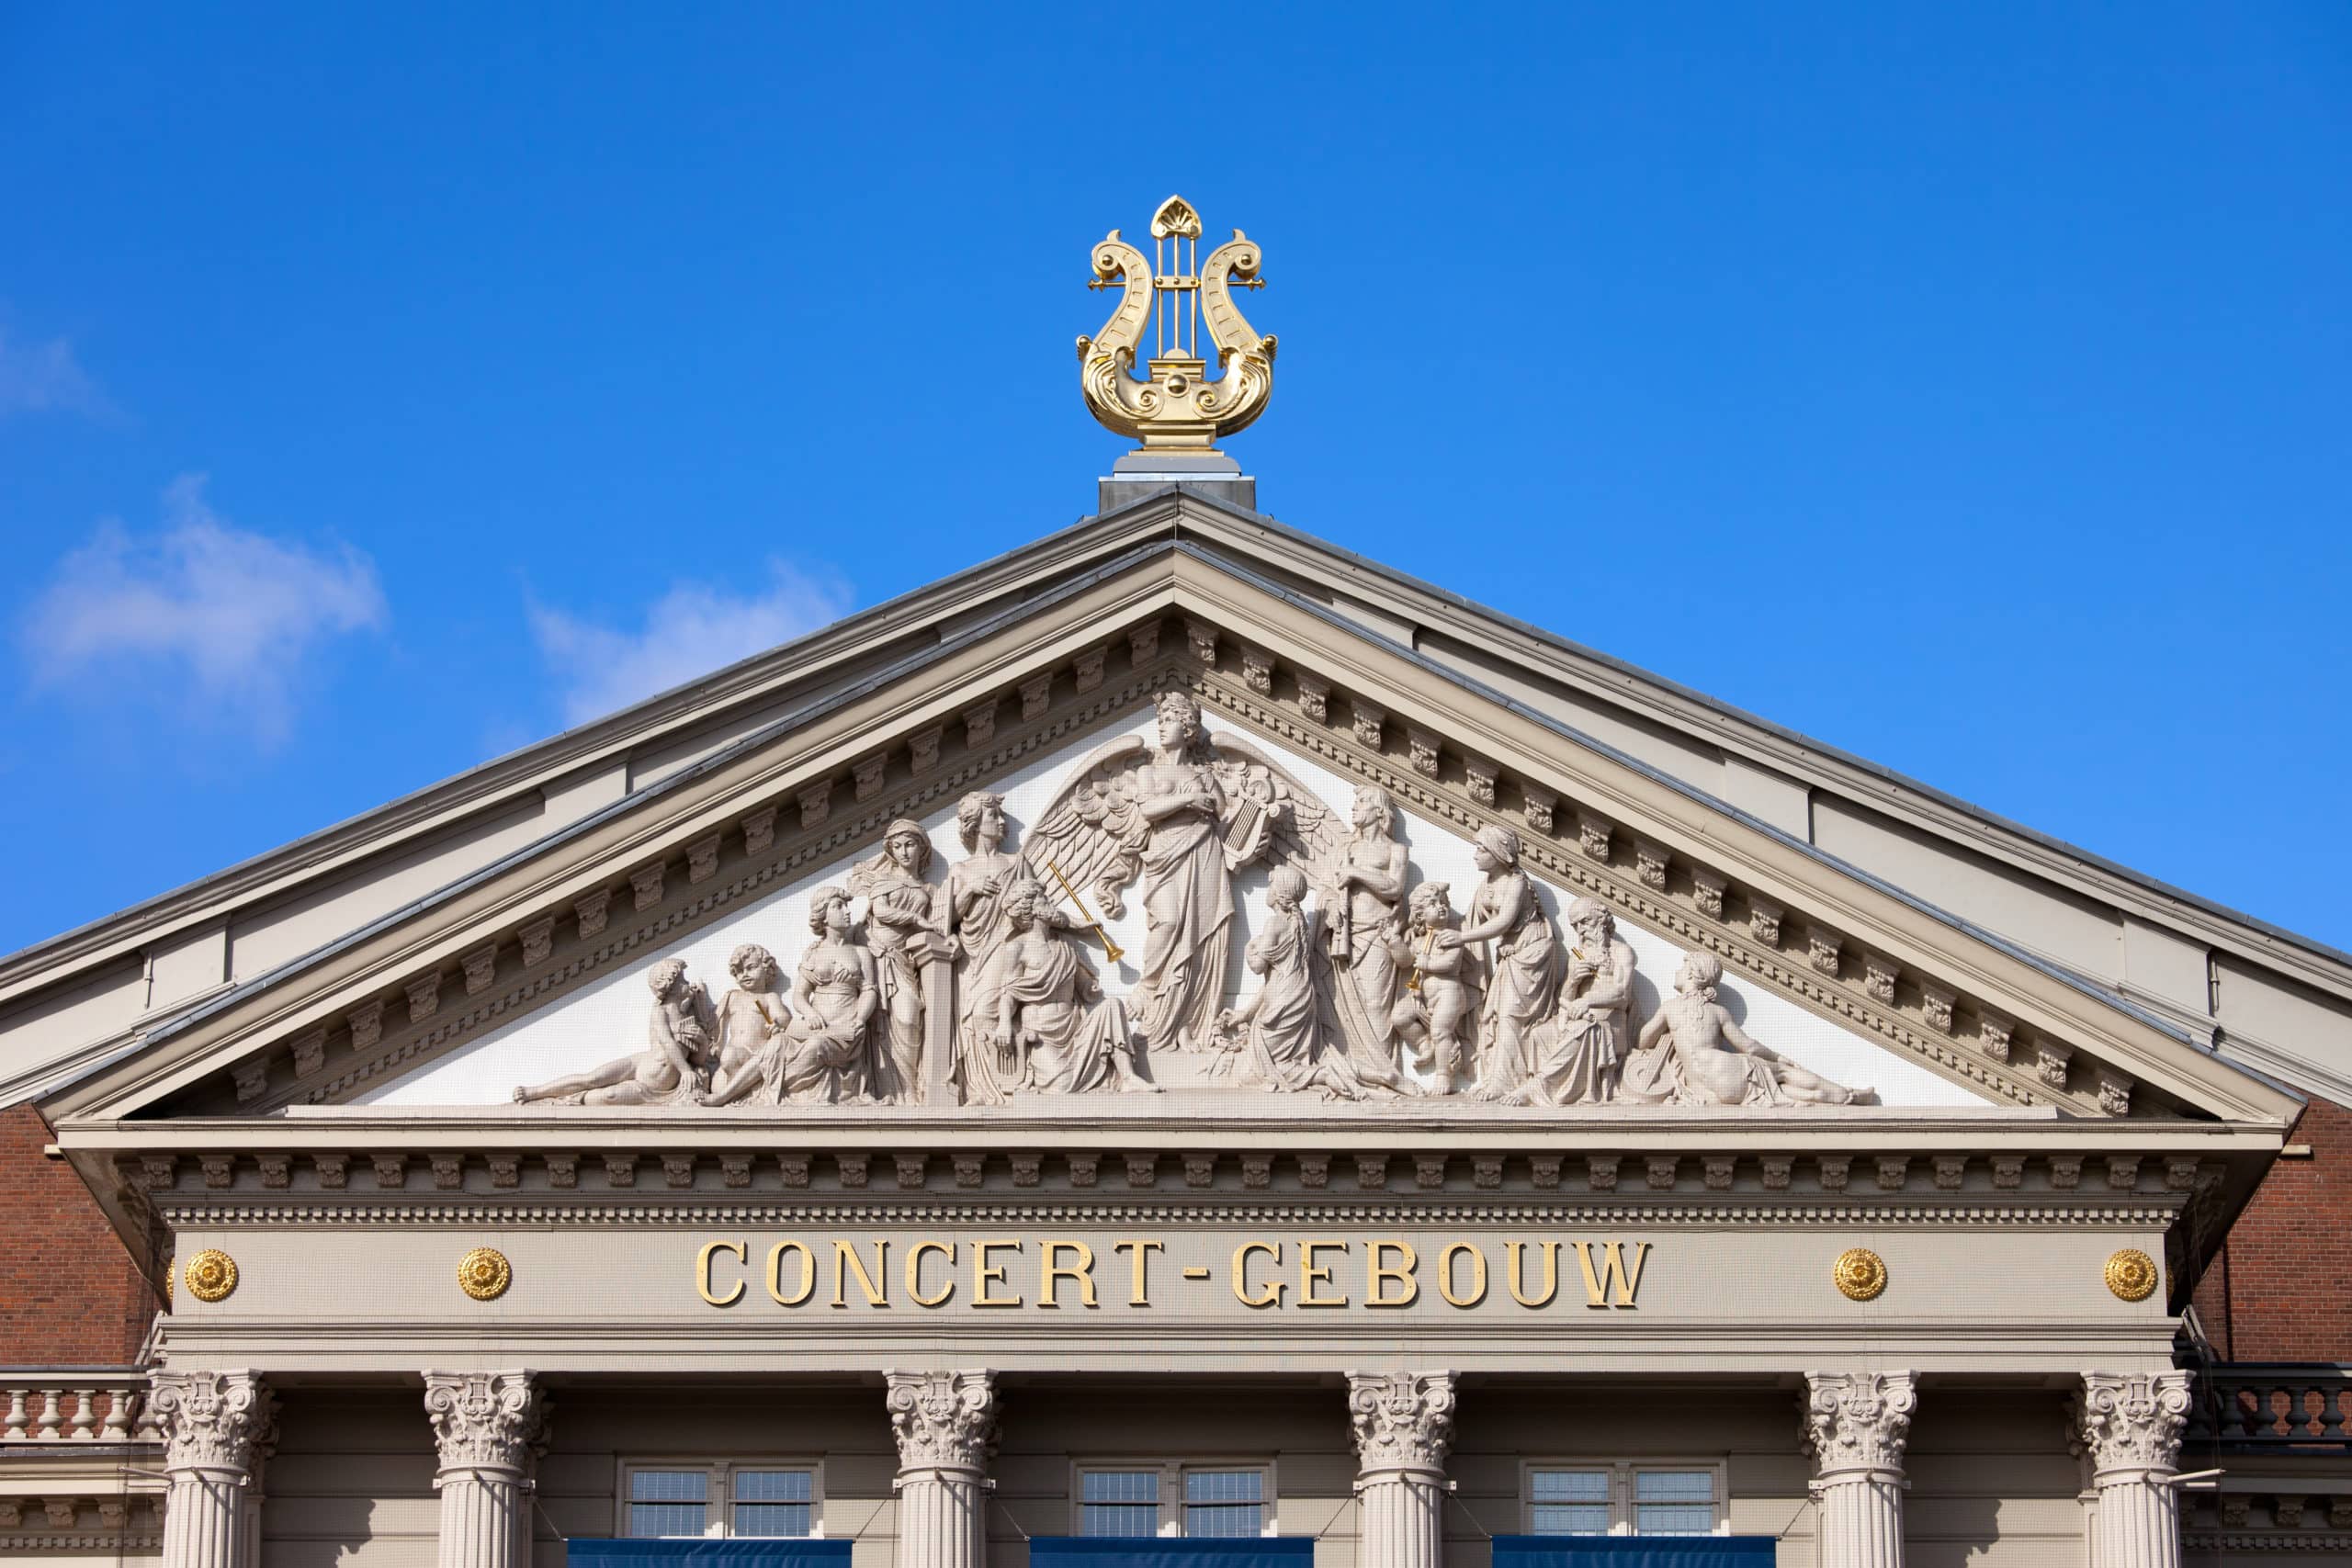 Tympanum with religious reliefs within triangular pediment of the Concertgebouw (concert hall) in Amsterdam, Netherlands, 19th century Neoclassical style.